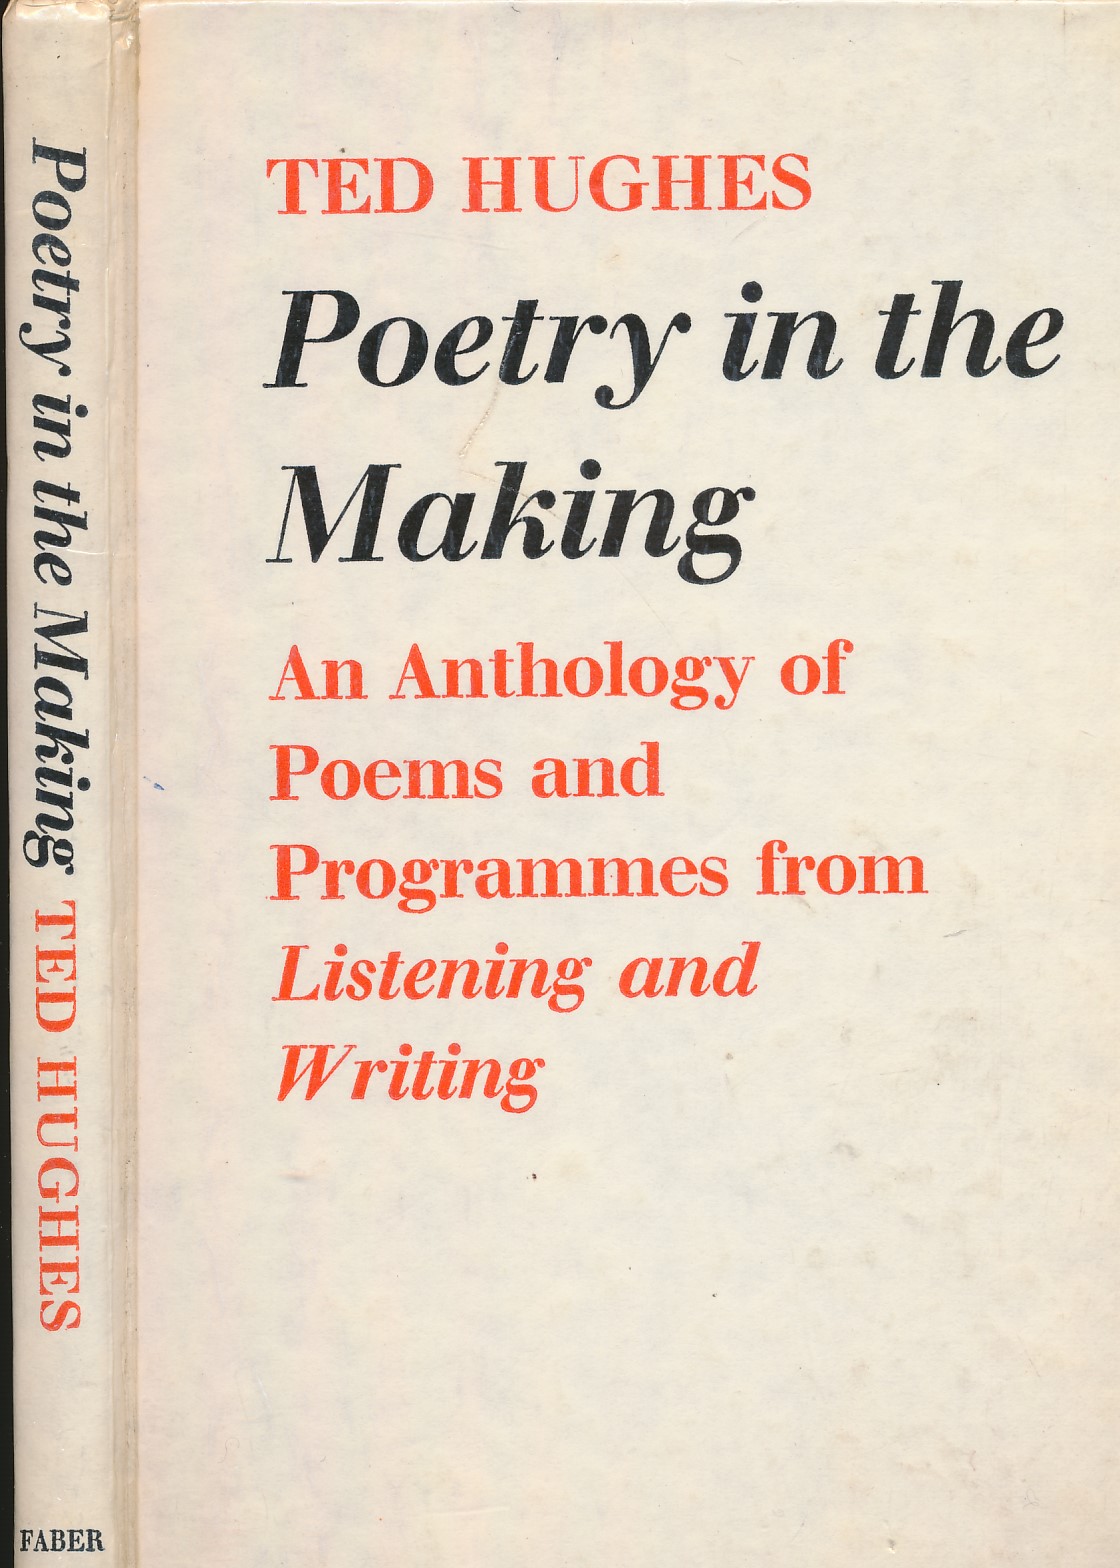 Poetry in the Making. An Anthology of Poems and Programmes from 'Listening and Writing'